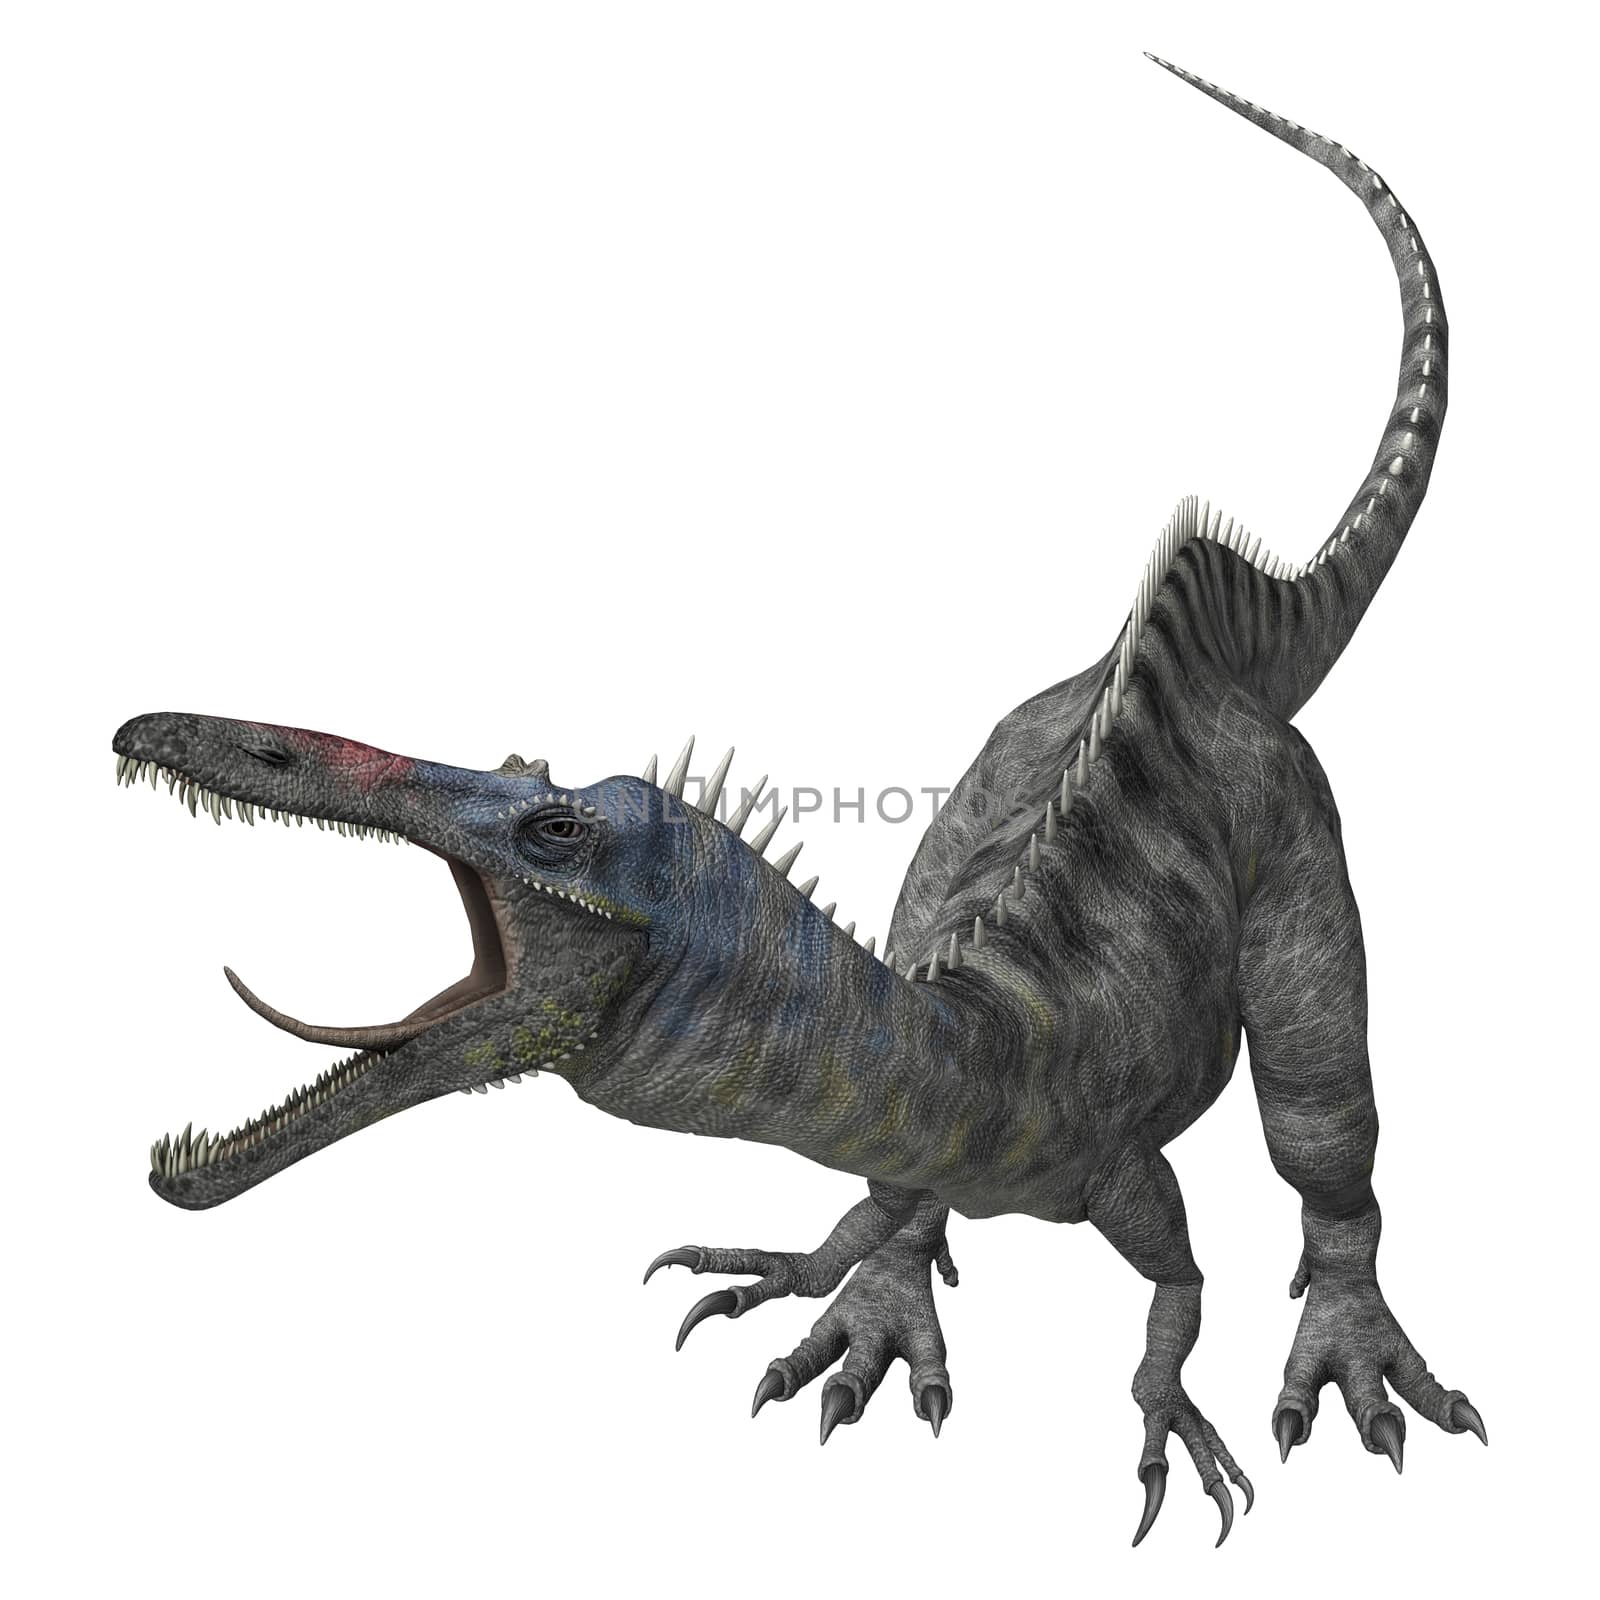 3D digital render of an aggressive dinosaur Suchomimus or Suchomimus tenerensis isolated on white background